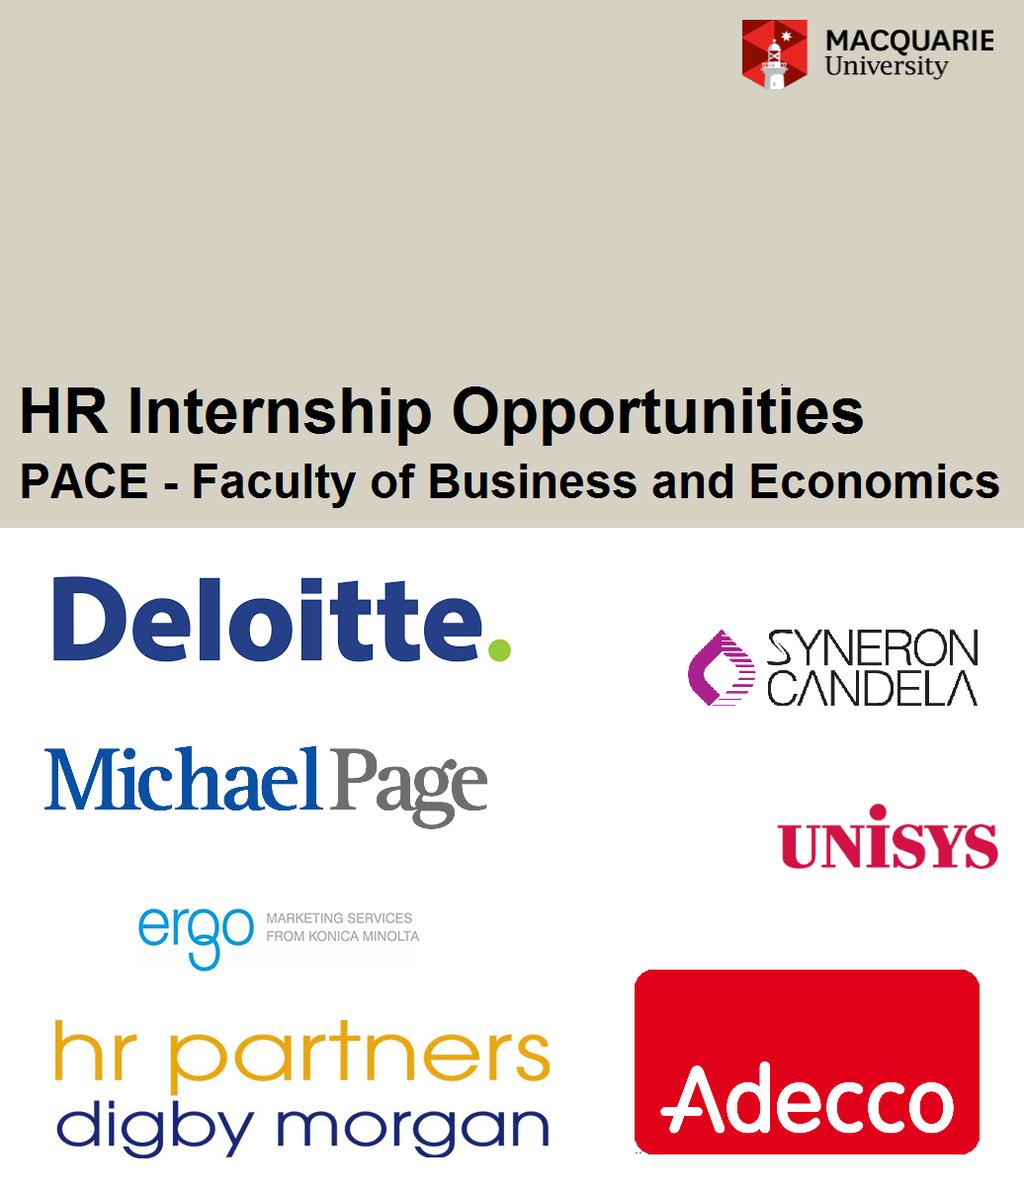 Why not complete an internship opportunity and gain credit towards your